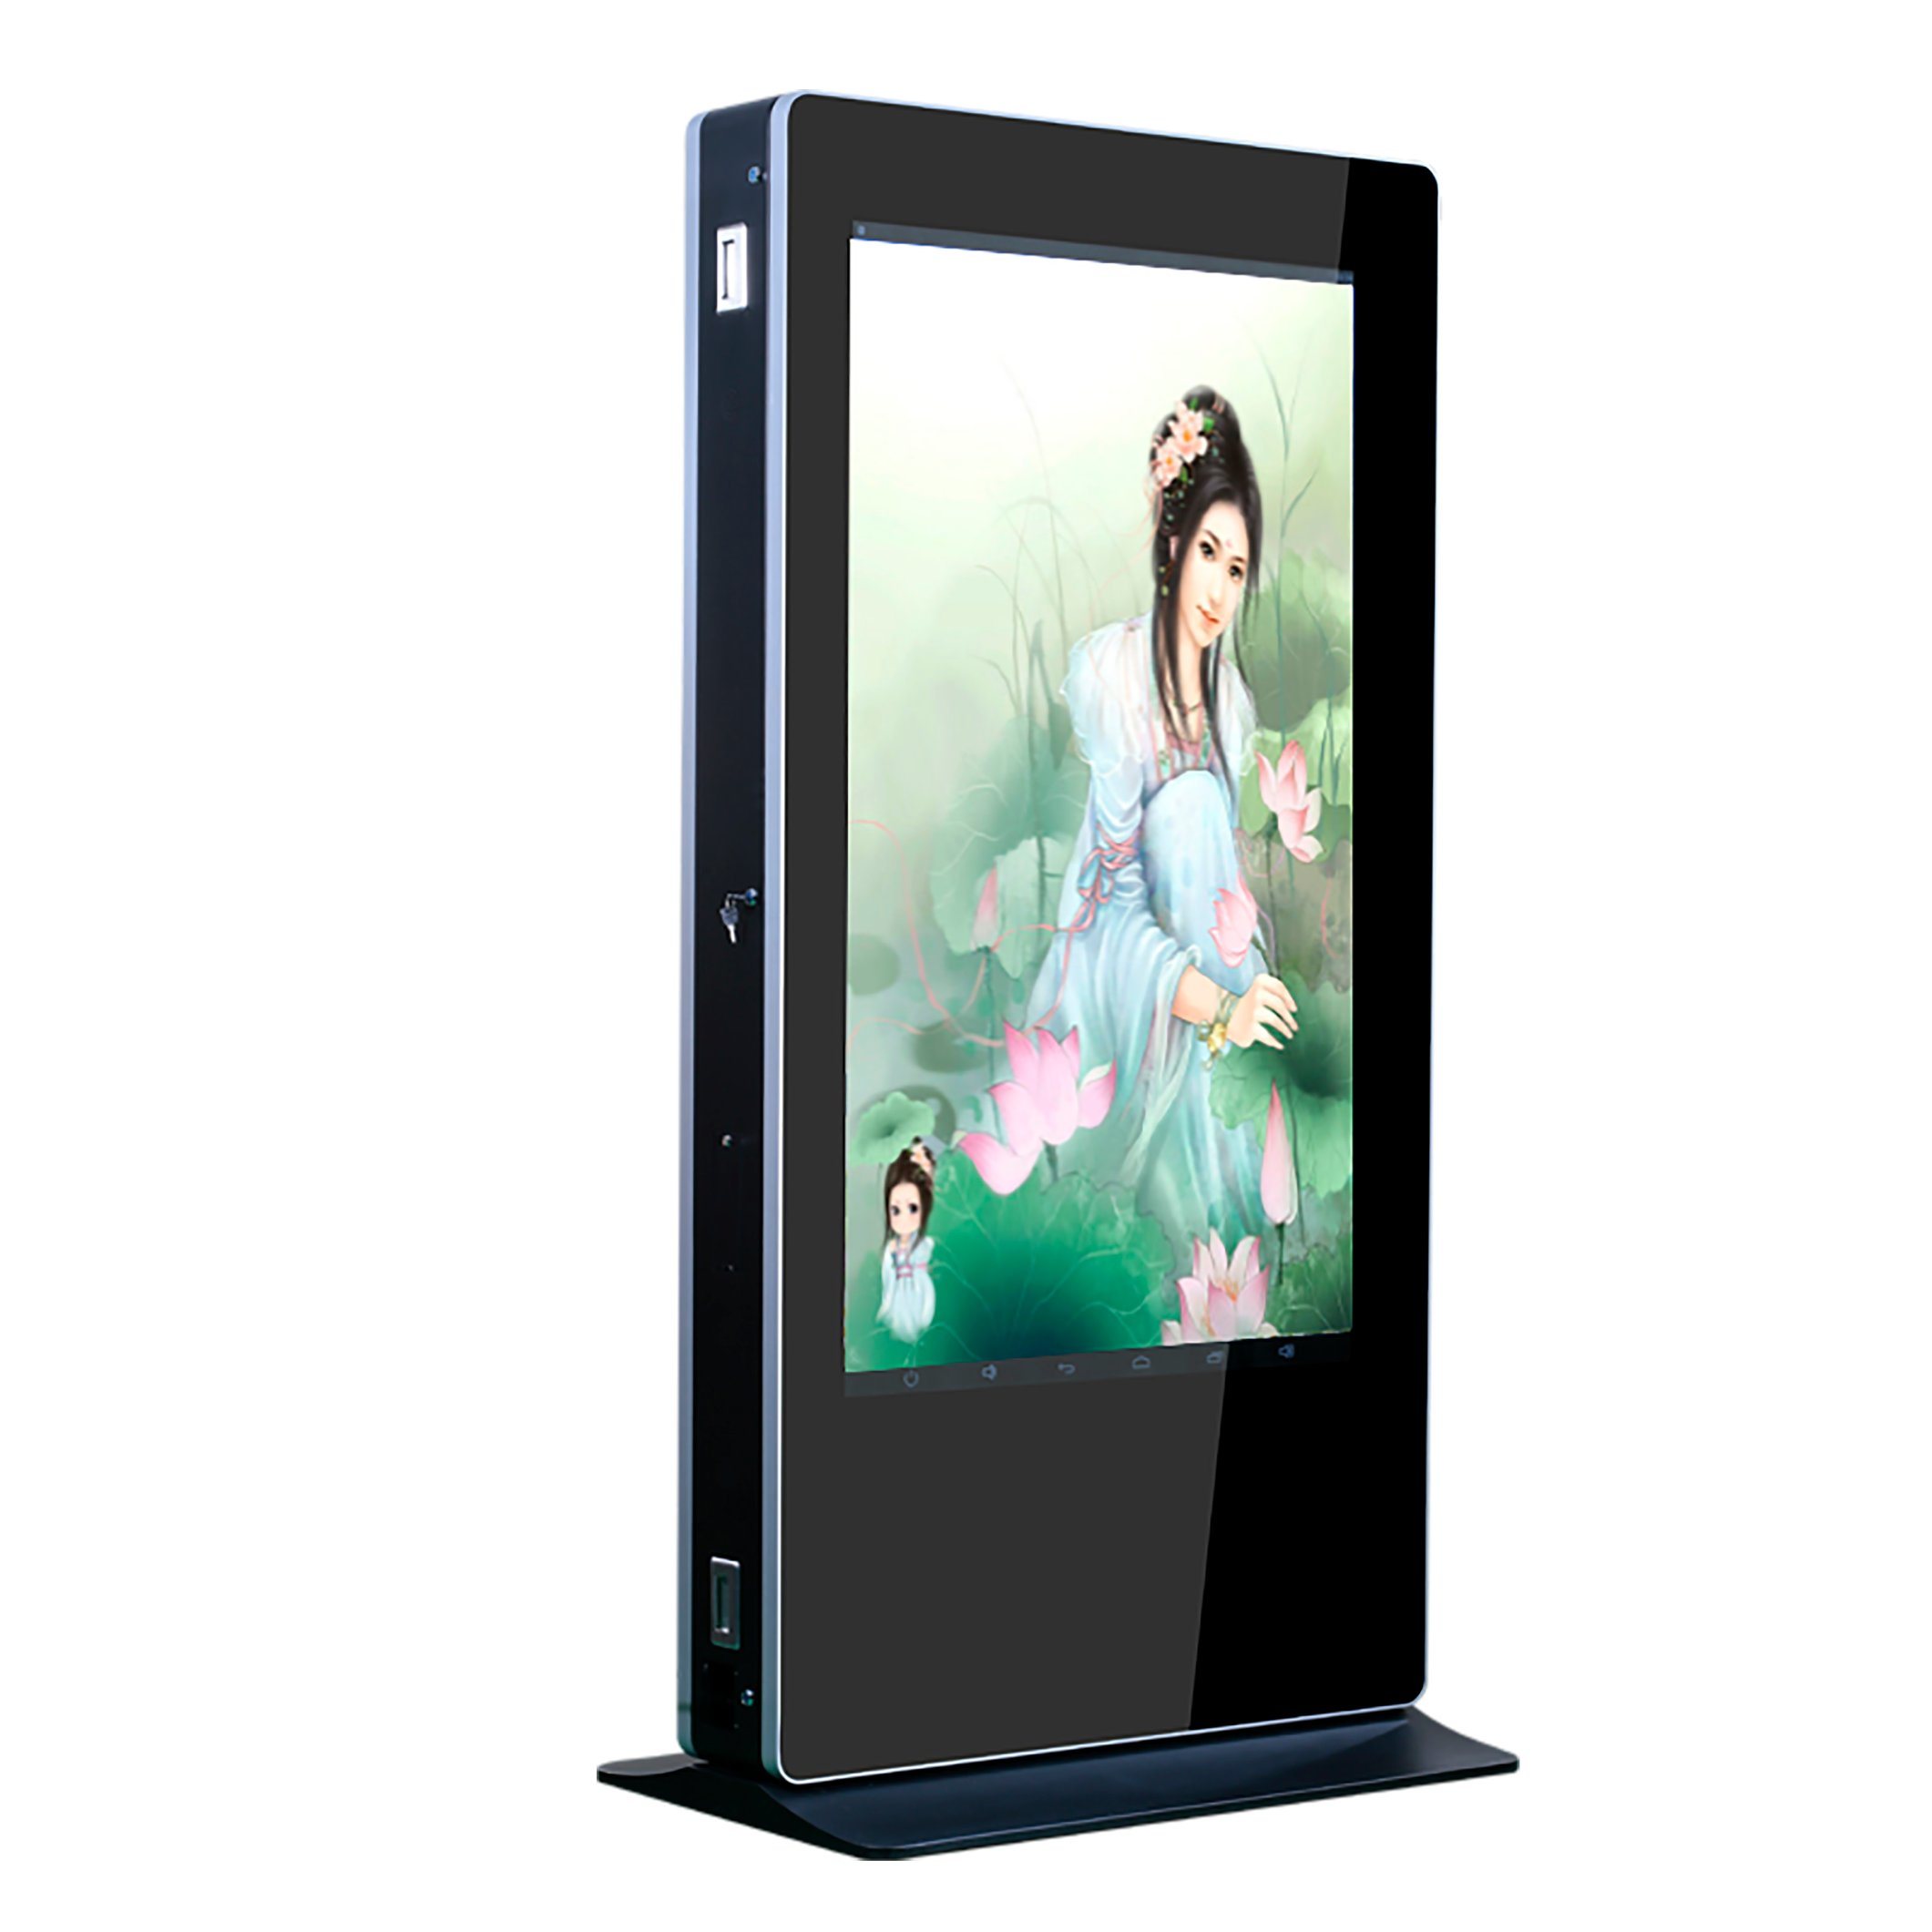 Stand Floor Outdoor Touch Screen Kiosk LCD Monitor Display